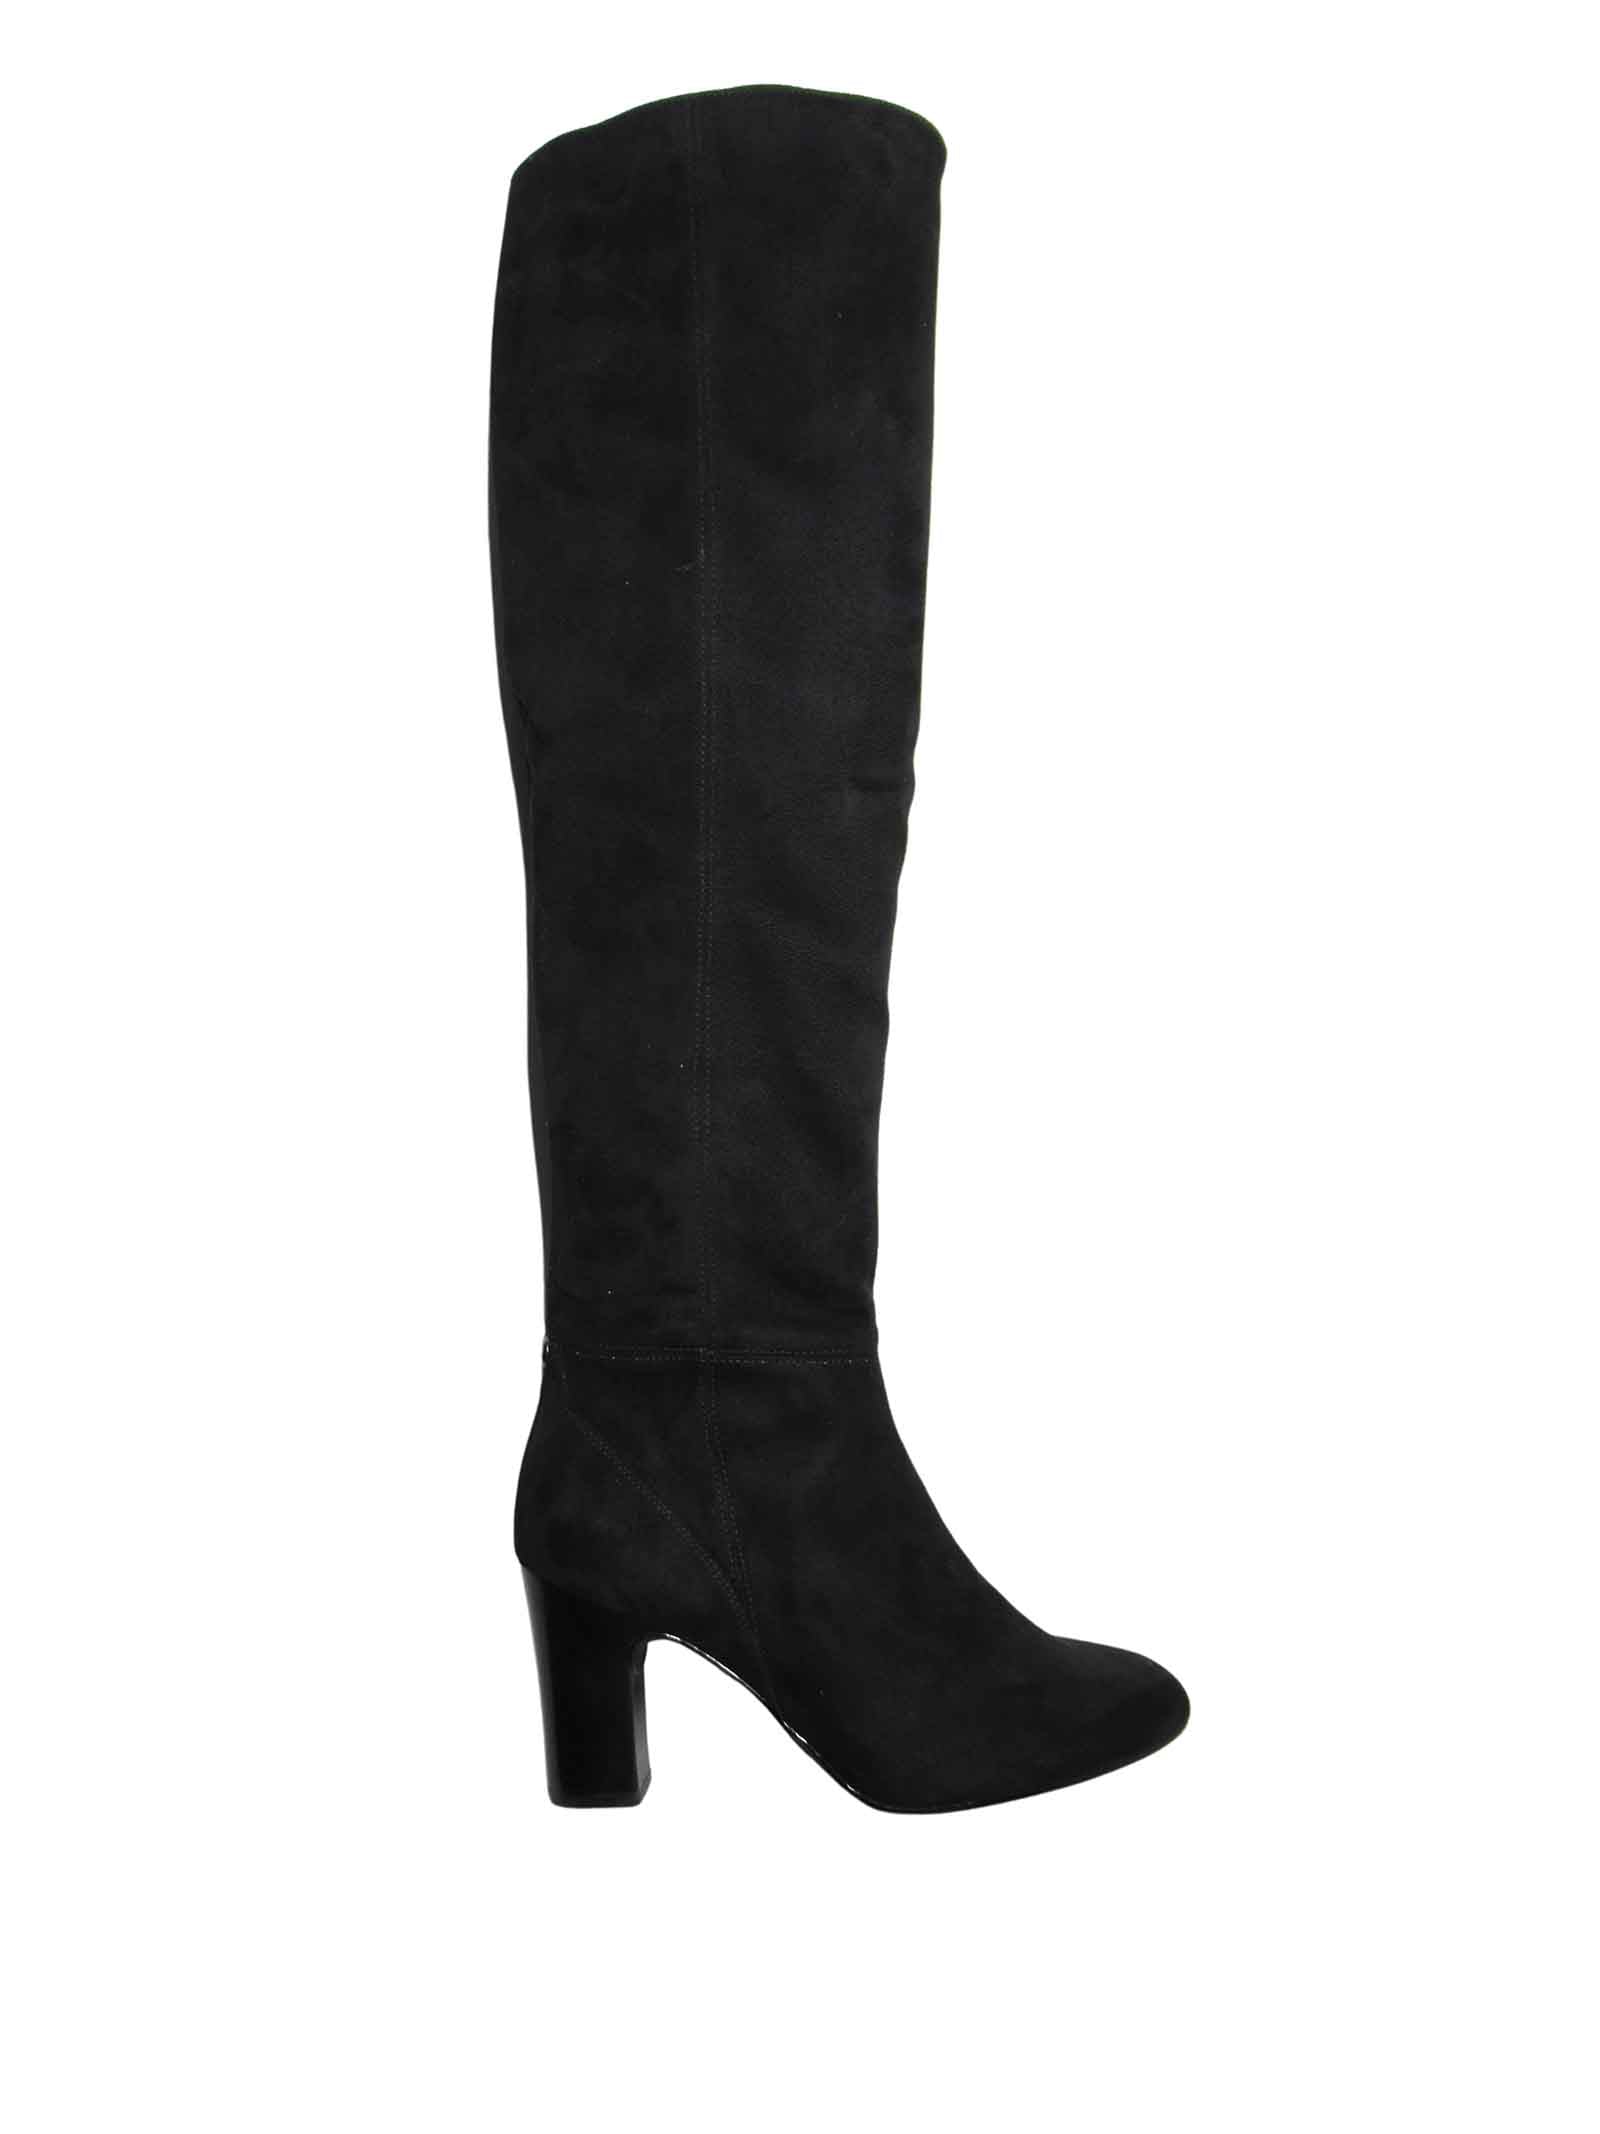 Women's Footwear Over-the-Knee Boots Urica in Black Eco-Suede with High Heel and High Upper